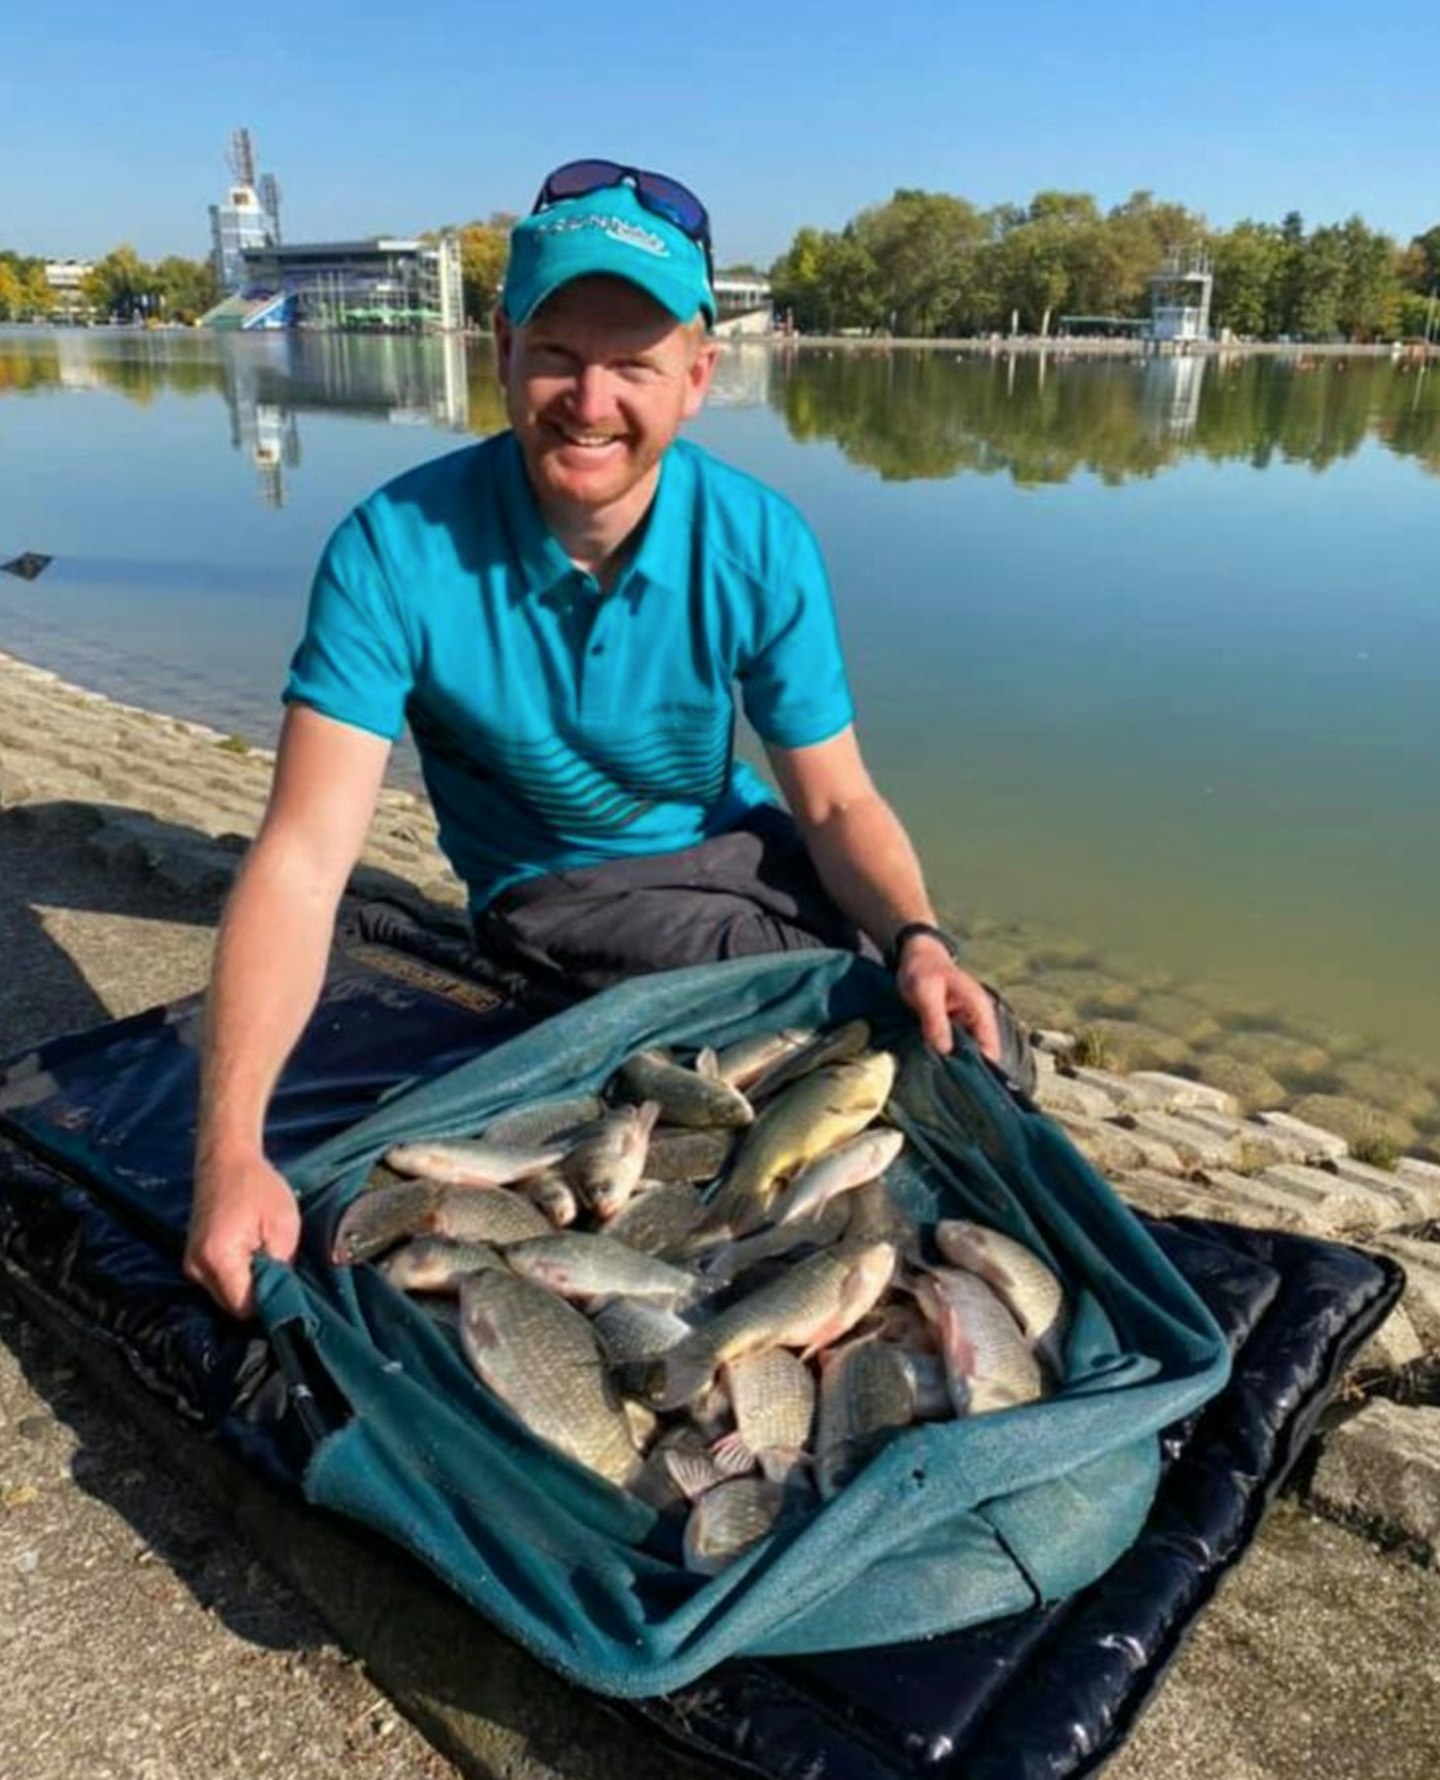 Matt Godfrey with a net of carassio, the dominant species on the Plodiv Canal